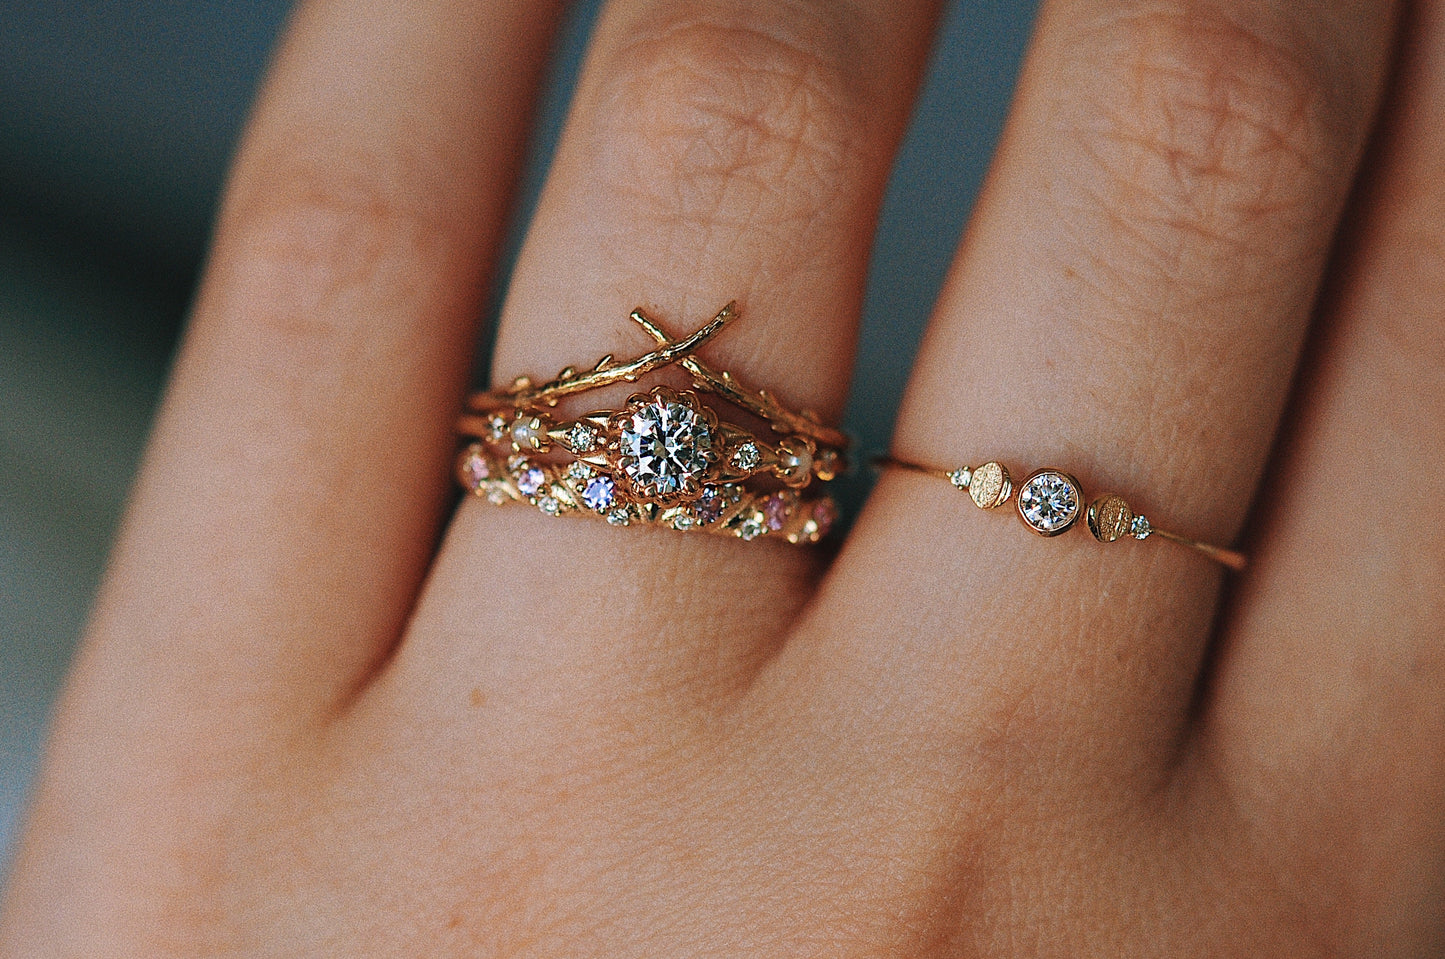 Baby Cosmic Witch Ring - Ready-to-ship